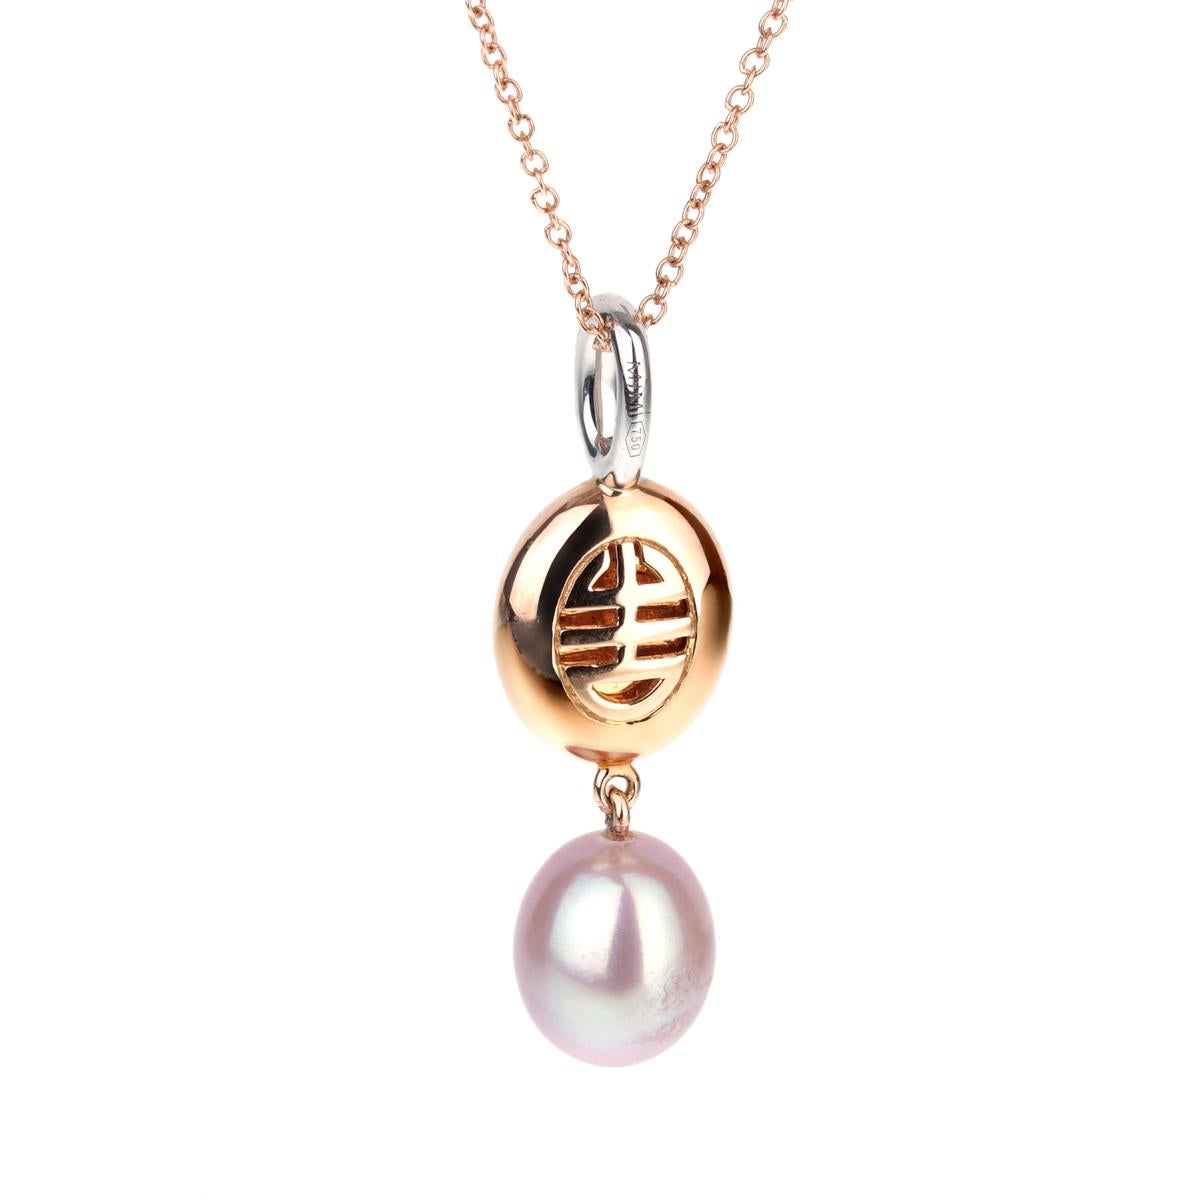 A fabulous drop necklace by Mimi Milano featuring a 3.90 ct peridot followed by a 7.5x8mm violet cultured pearl adorned by round brilliant cut diamonds in 18k white and rose gold.